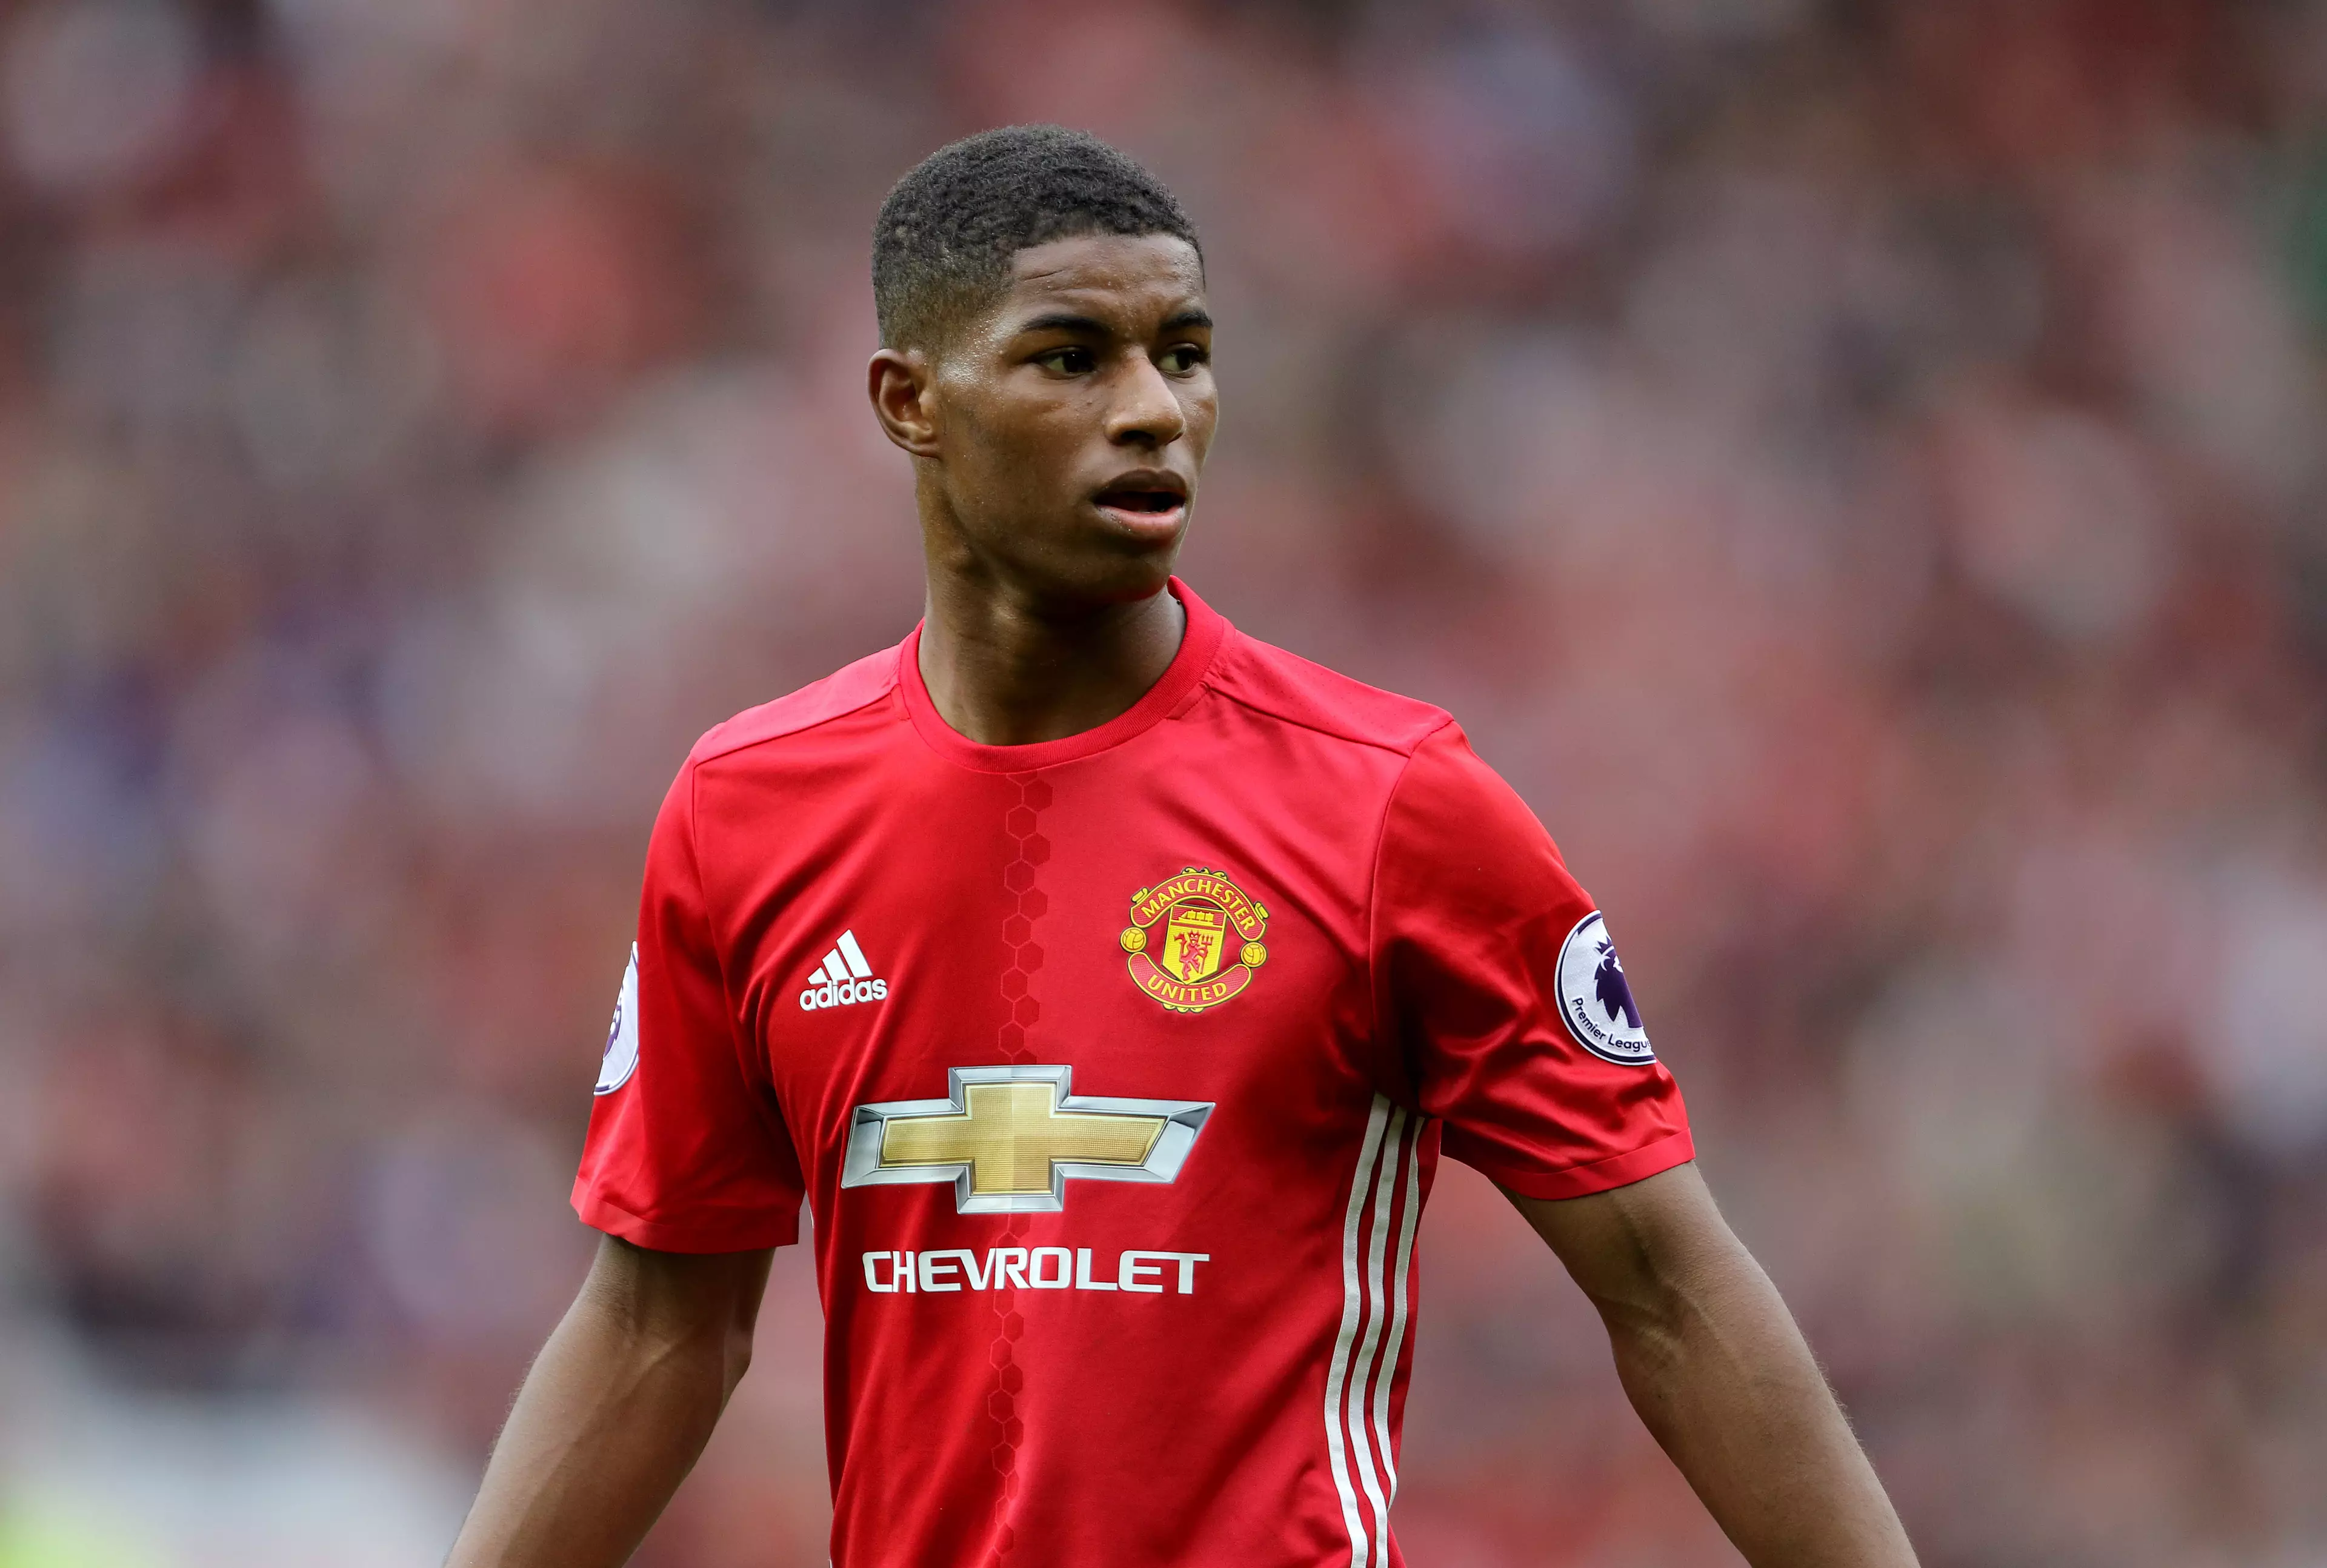 Marcus Rashford Had An Unlikely Mentor At Manchester United